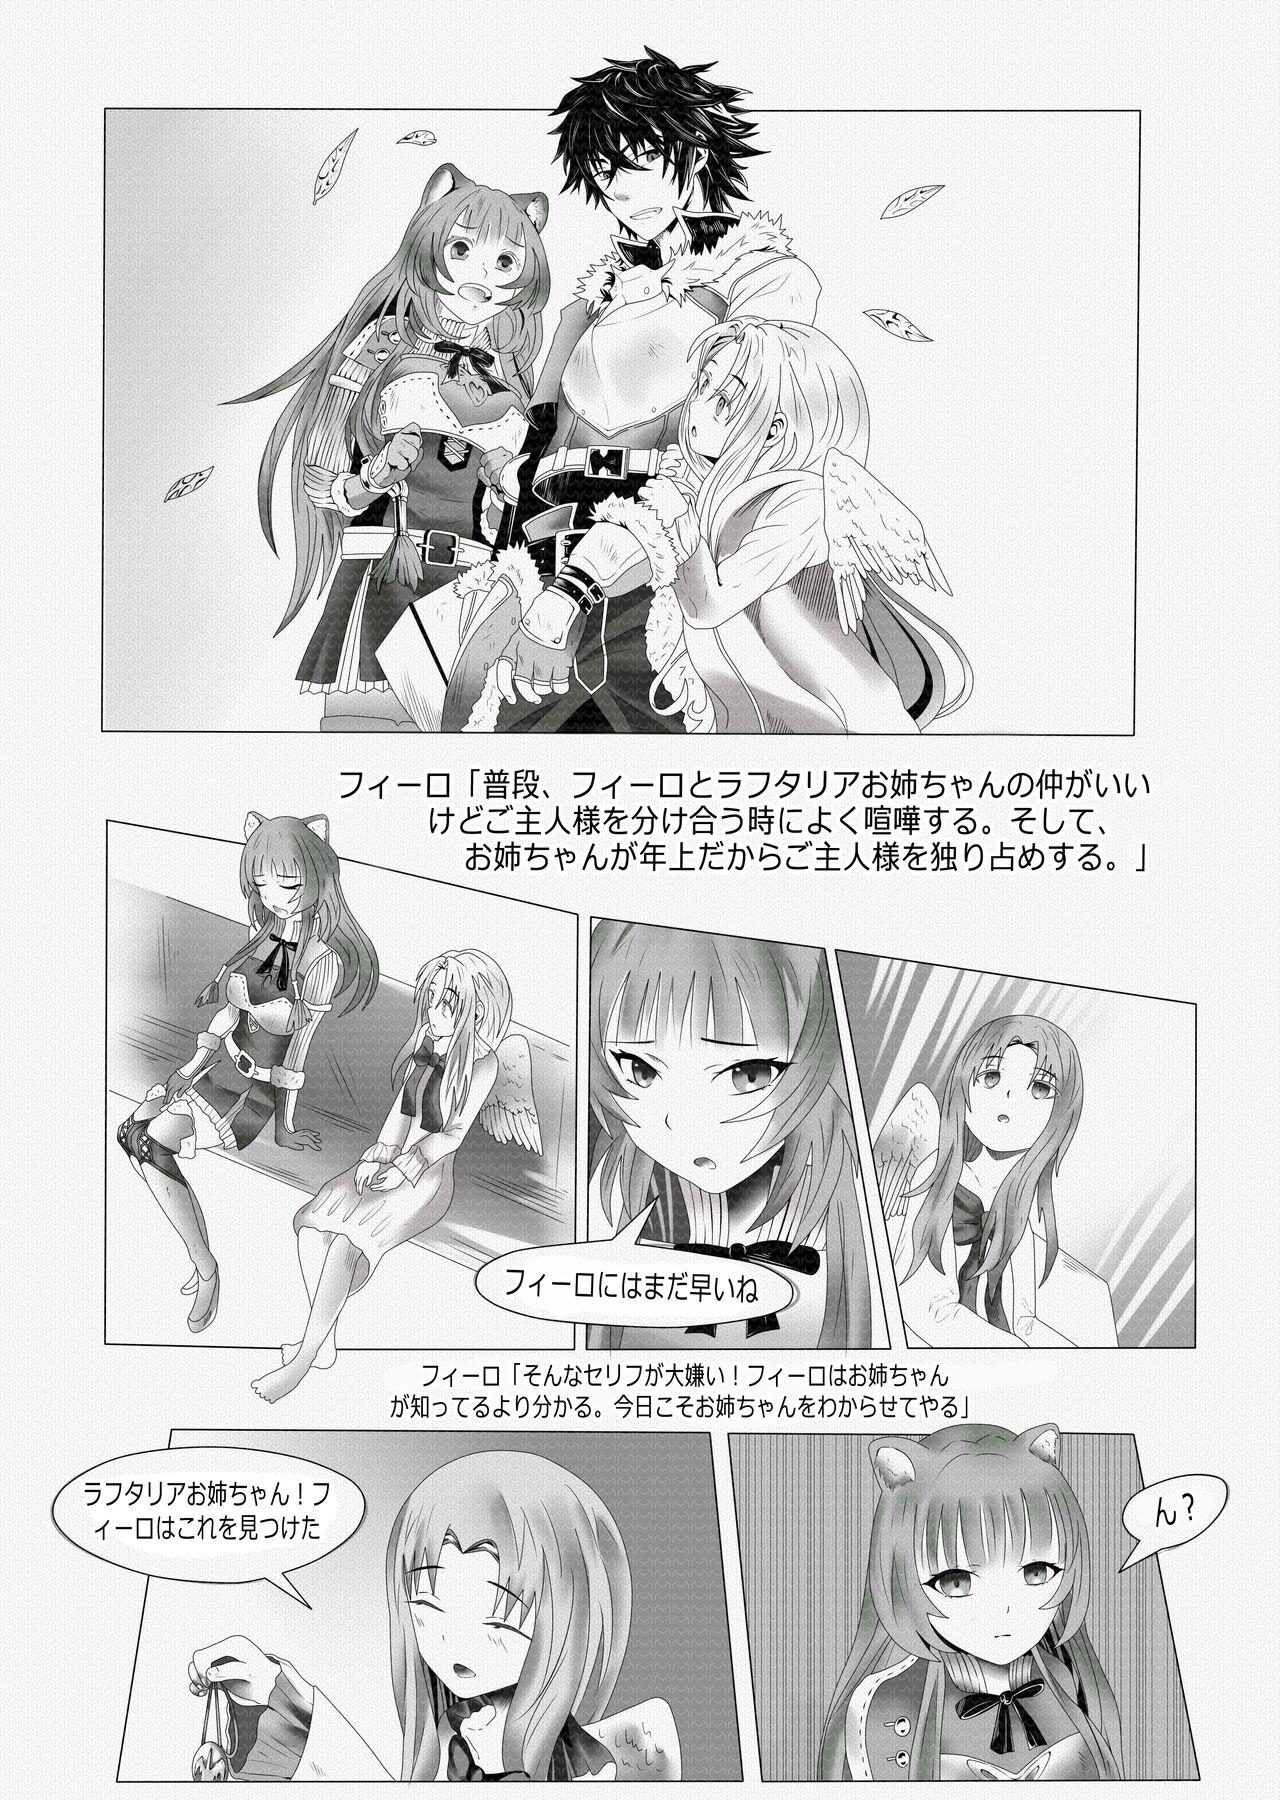 Grande The Rising Of The Shield Hero - Happy Point with My Sister and Teacher - Tate no yuusha no nariagari | the rising of the shield hero Sola - Page 2